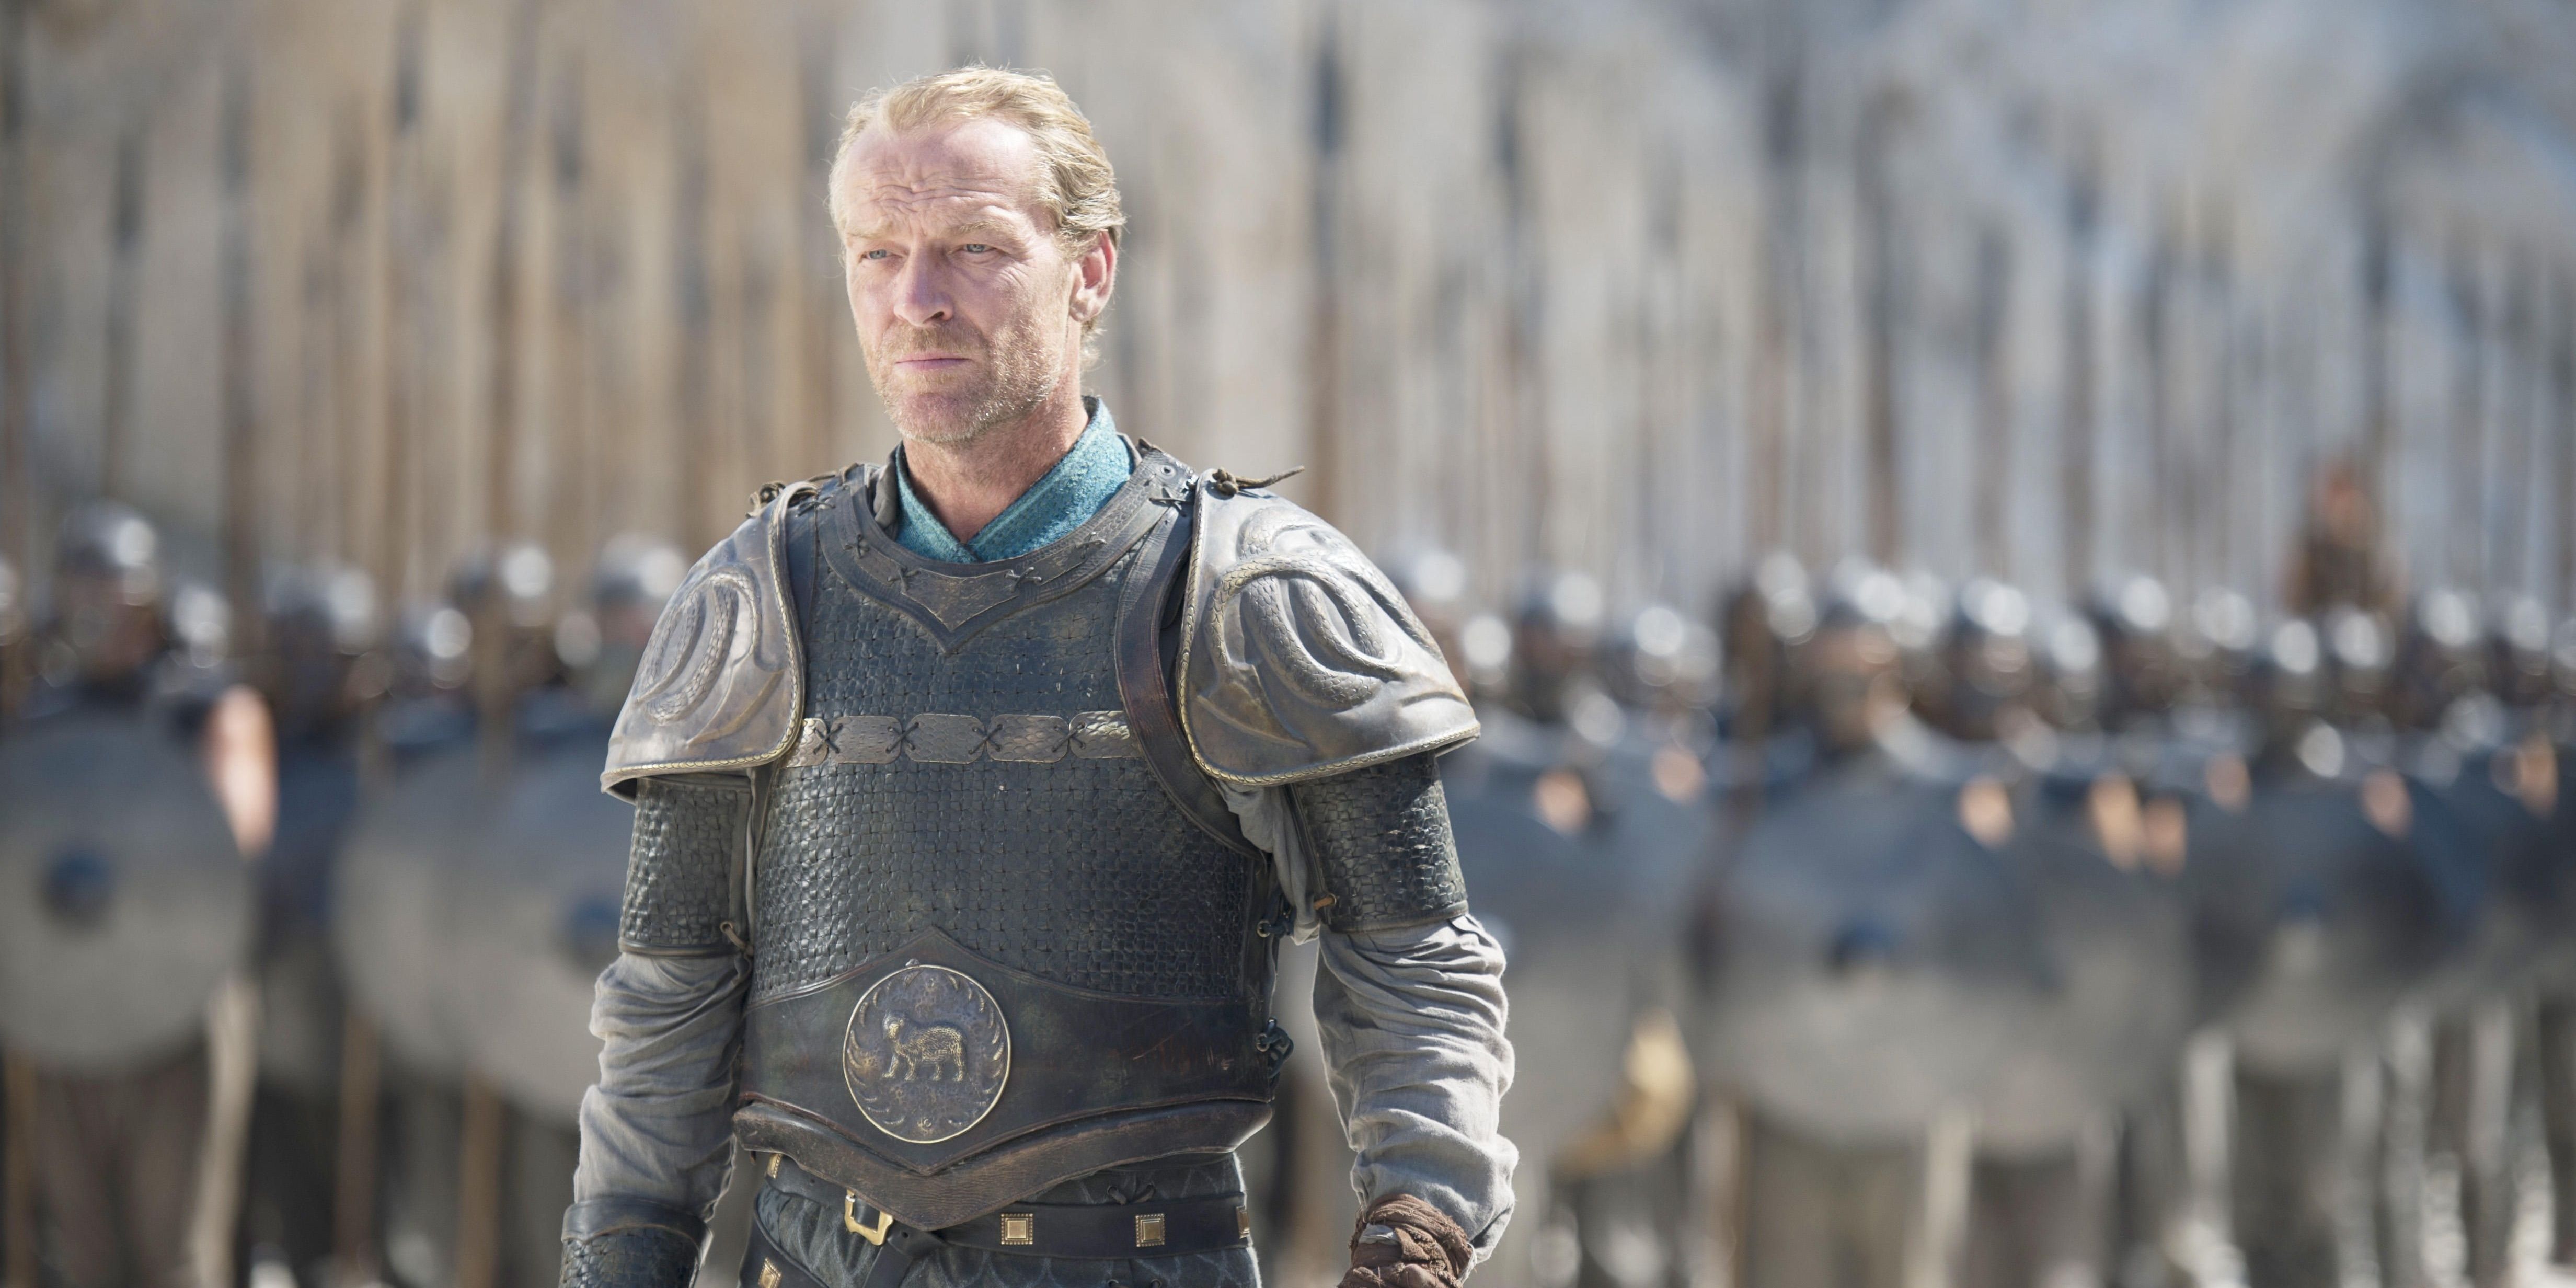 Iain Glen as Jorah Mormont in Game of Thrones standing in front of an army of Unsullied